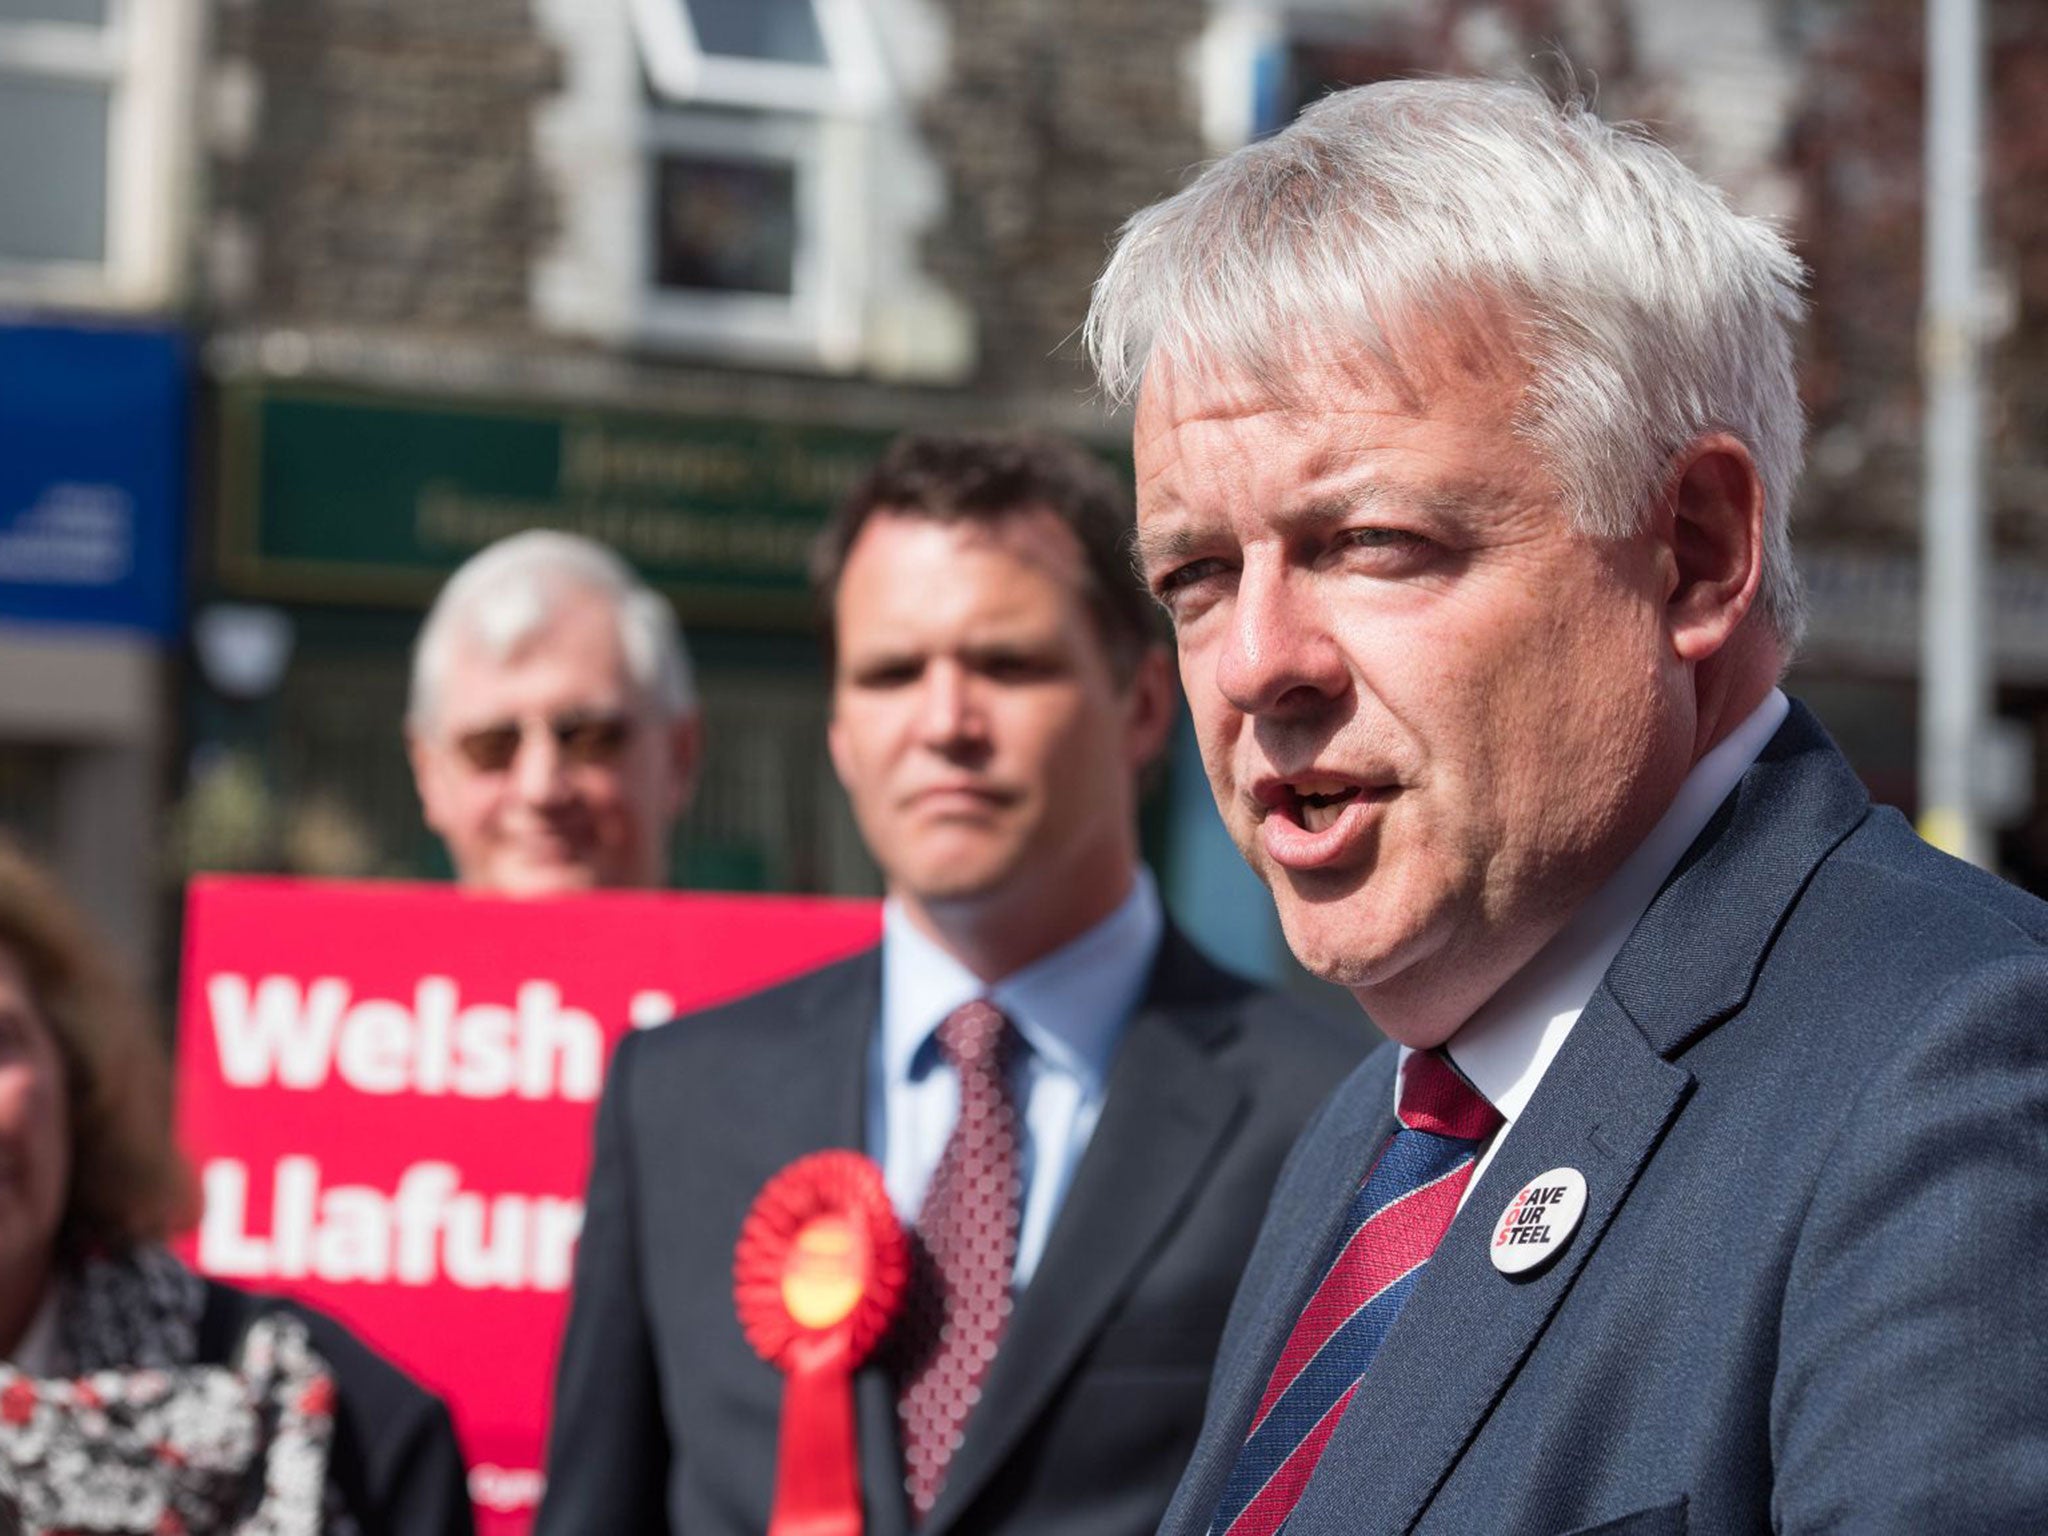 Carwyn Jones has called for Cardiff, Edinburgh and Belfast to have seats at the negotiating table